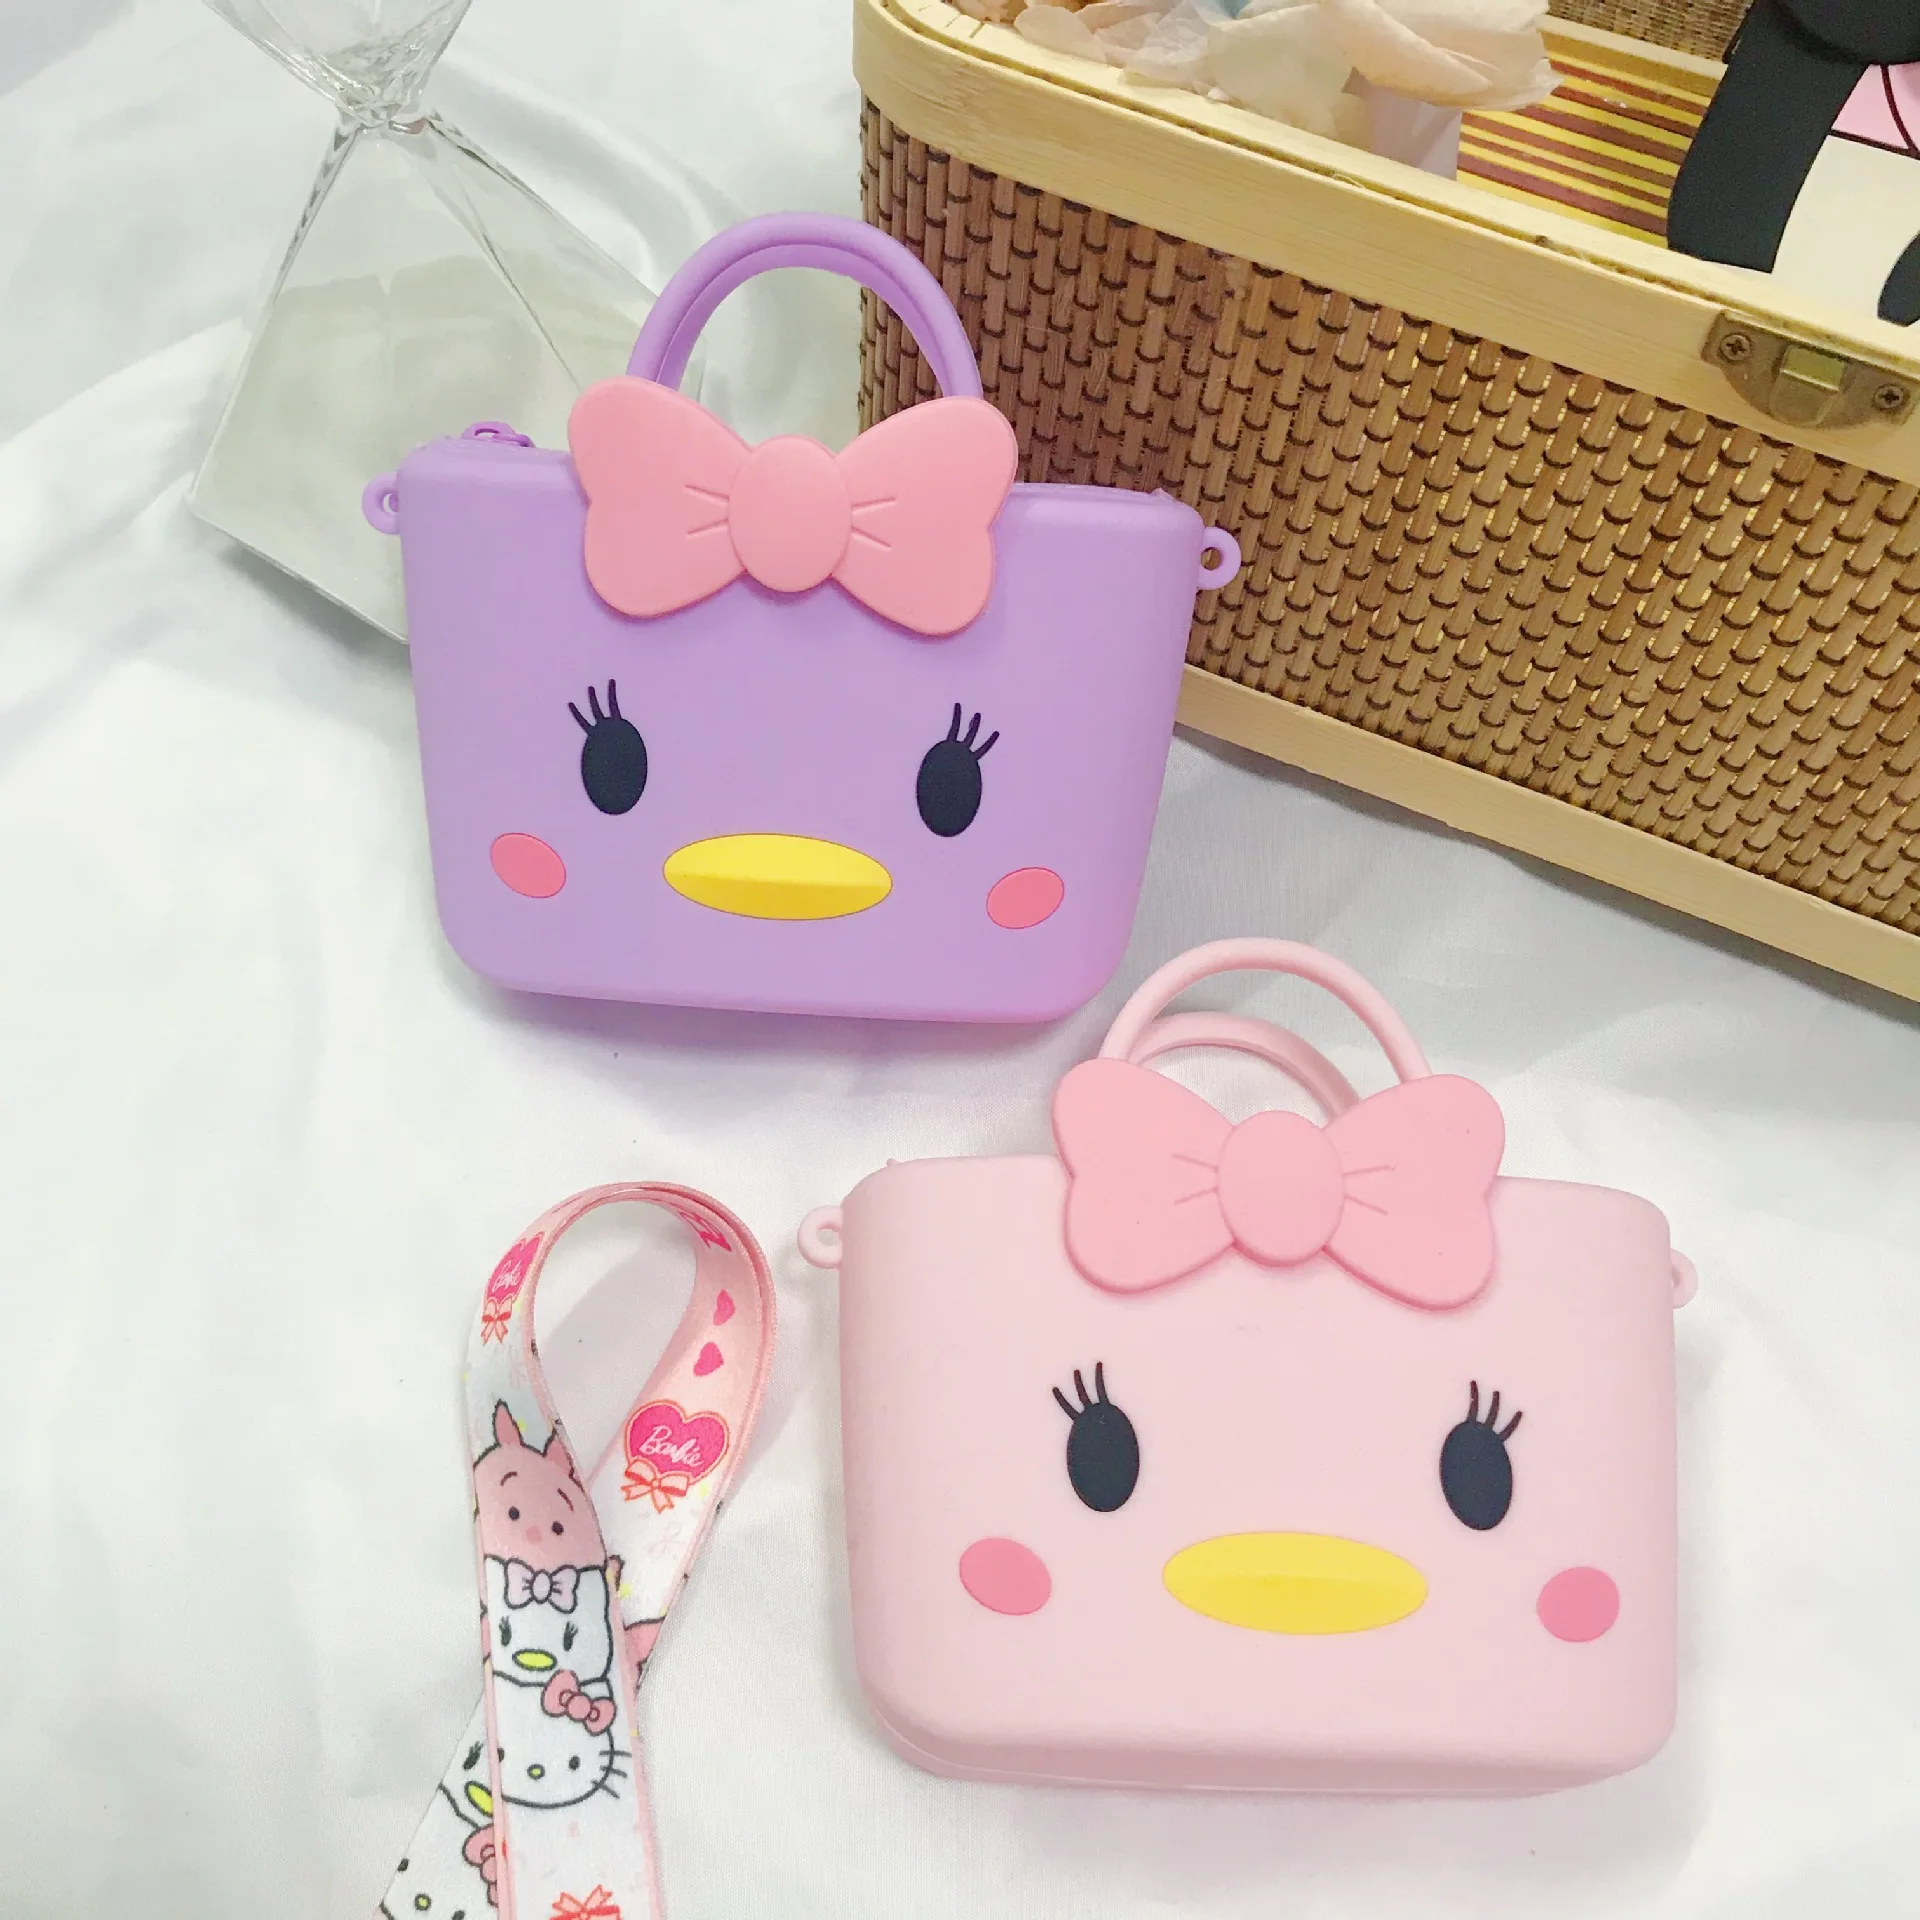 

Mini Coin Bag NEW Womans Coin Purse Wallet Silicone Cartoon Small Change Purse Wallet Small Tote Bag For Kids Girl Gift, 6 colors, more pls contact with us.